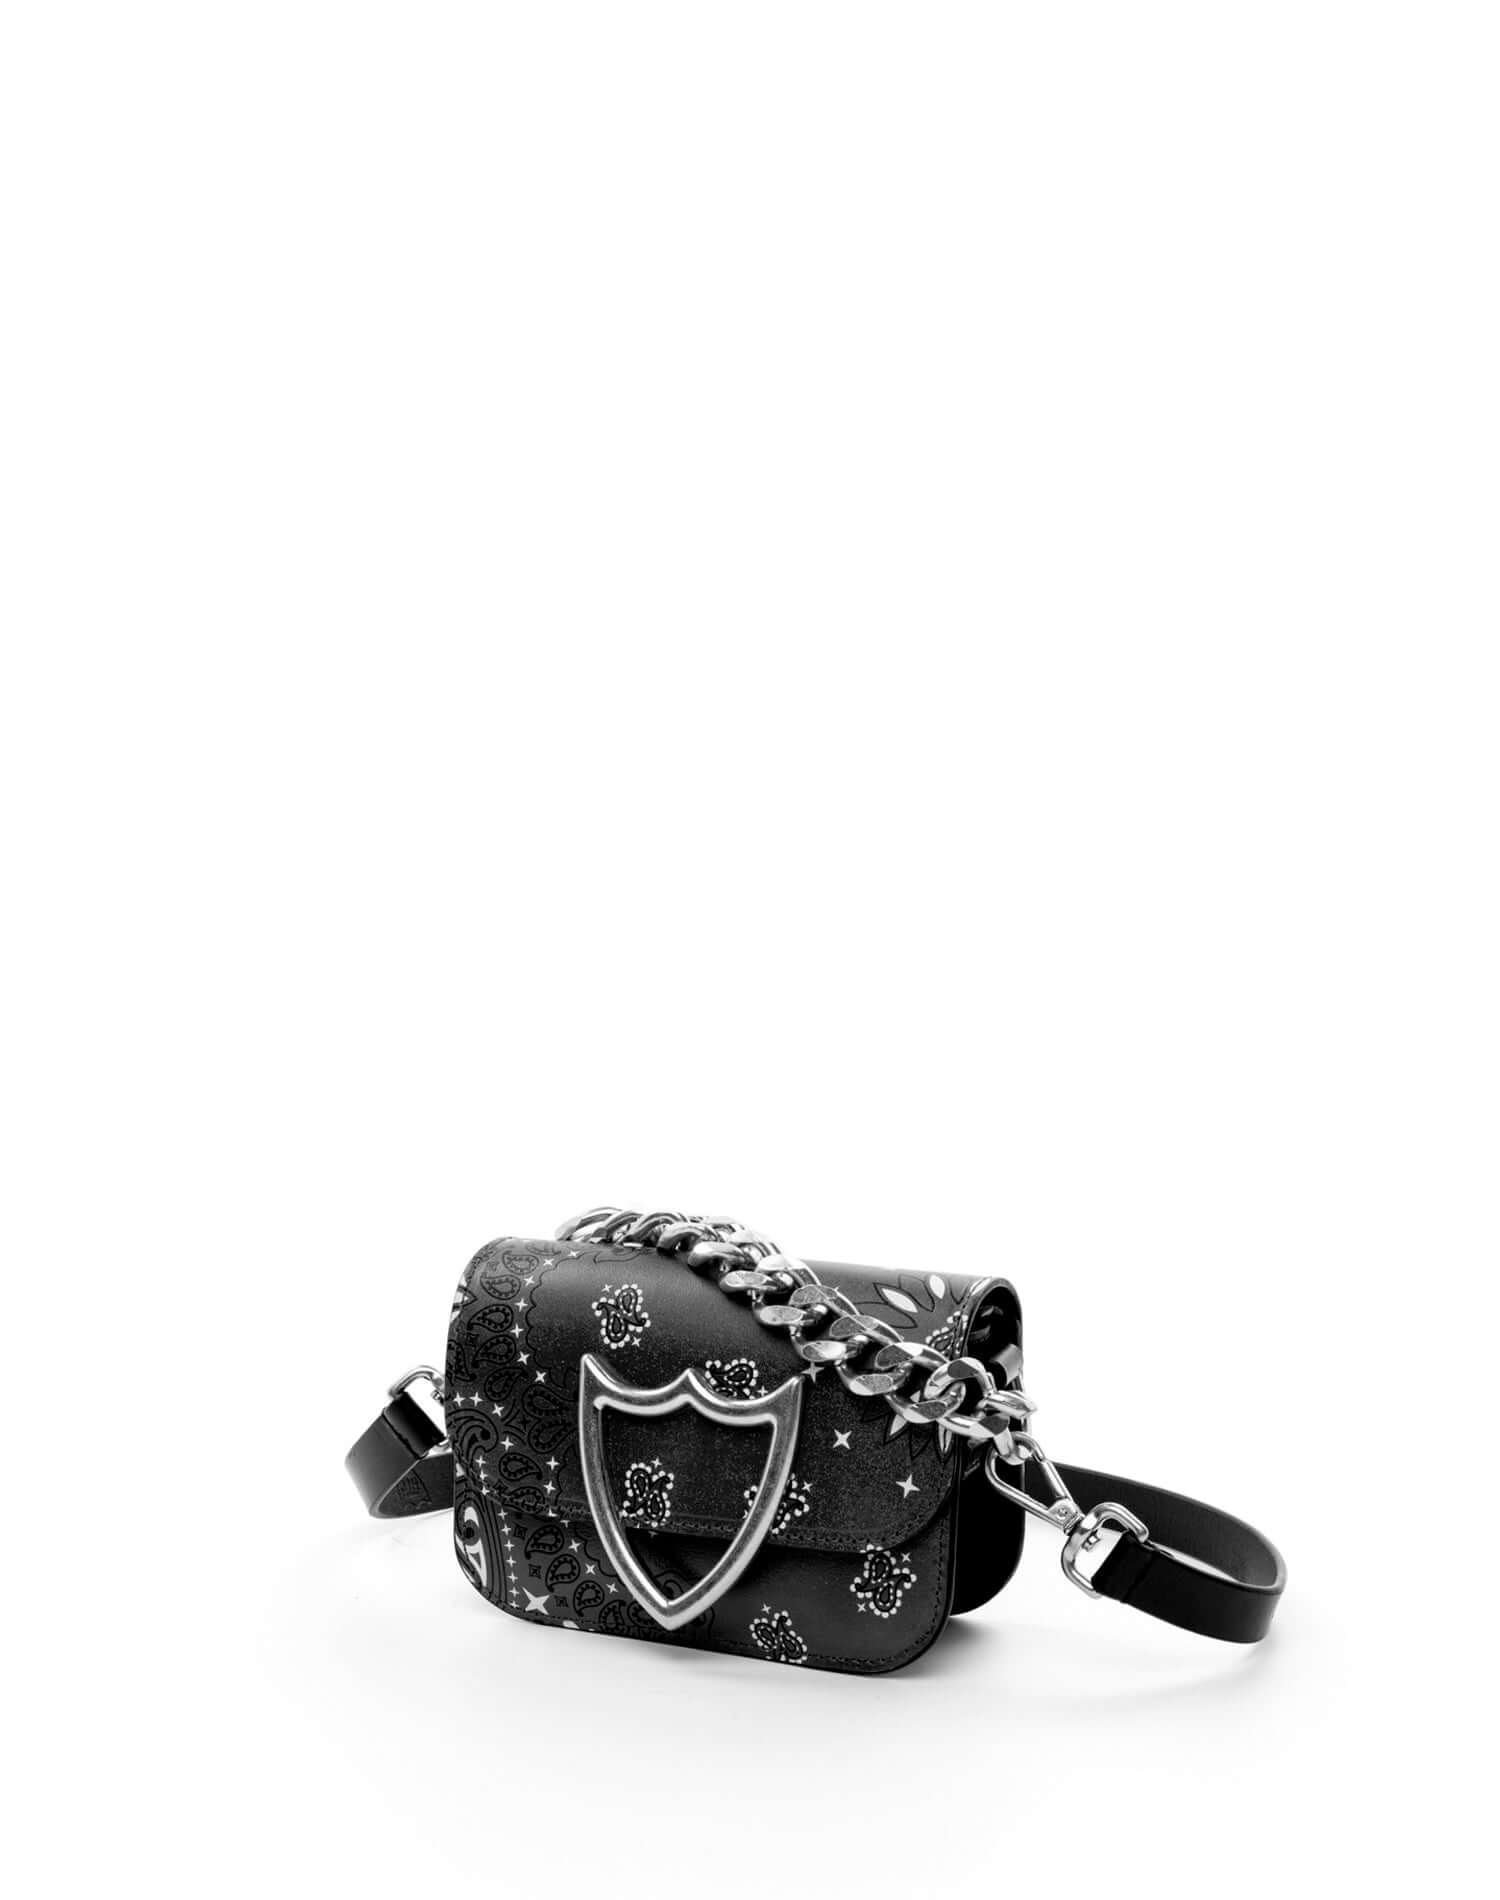 L.A. BANDANA MICRO BAG Leather micro bag. All over printed paisley bandana. Front flap with snap button closure. Front silver colored metal logo detail. One internal patch pocket. Leather lining. Leather shoulder strap and metal chain little strap. Made i